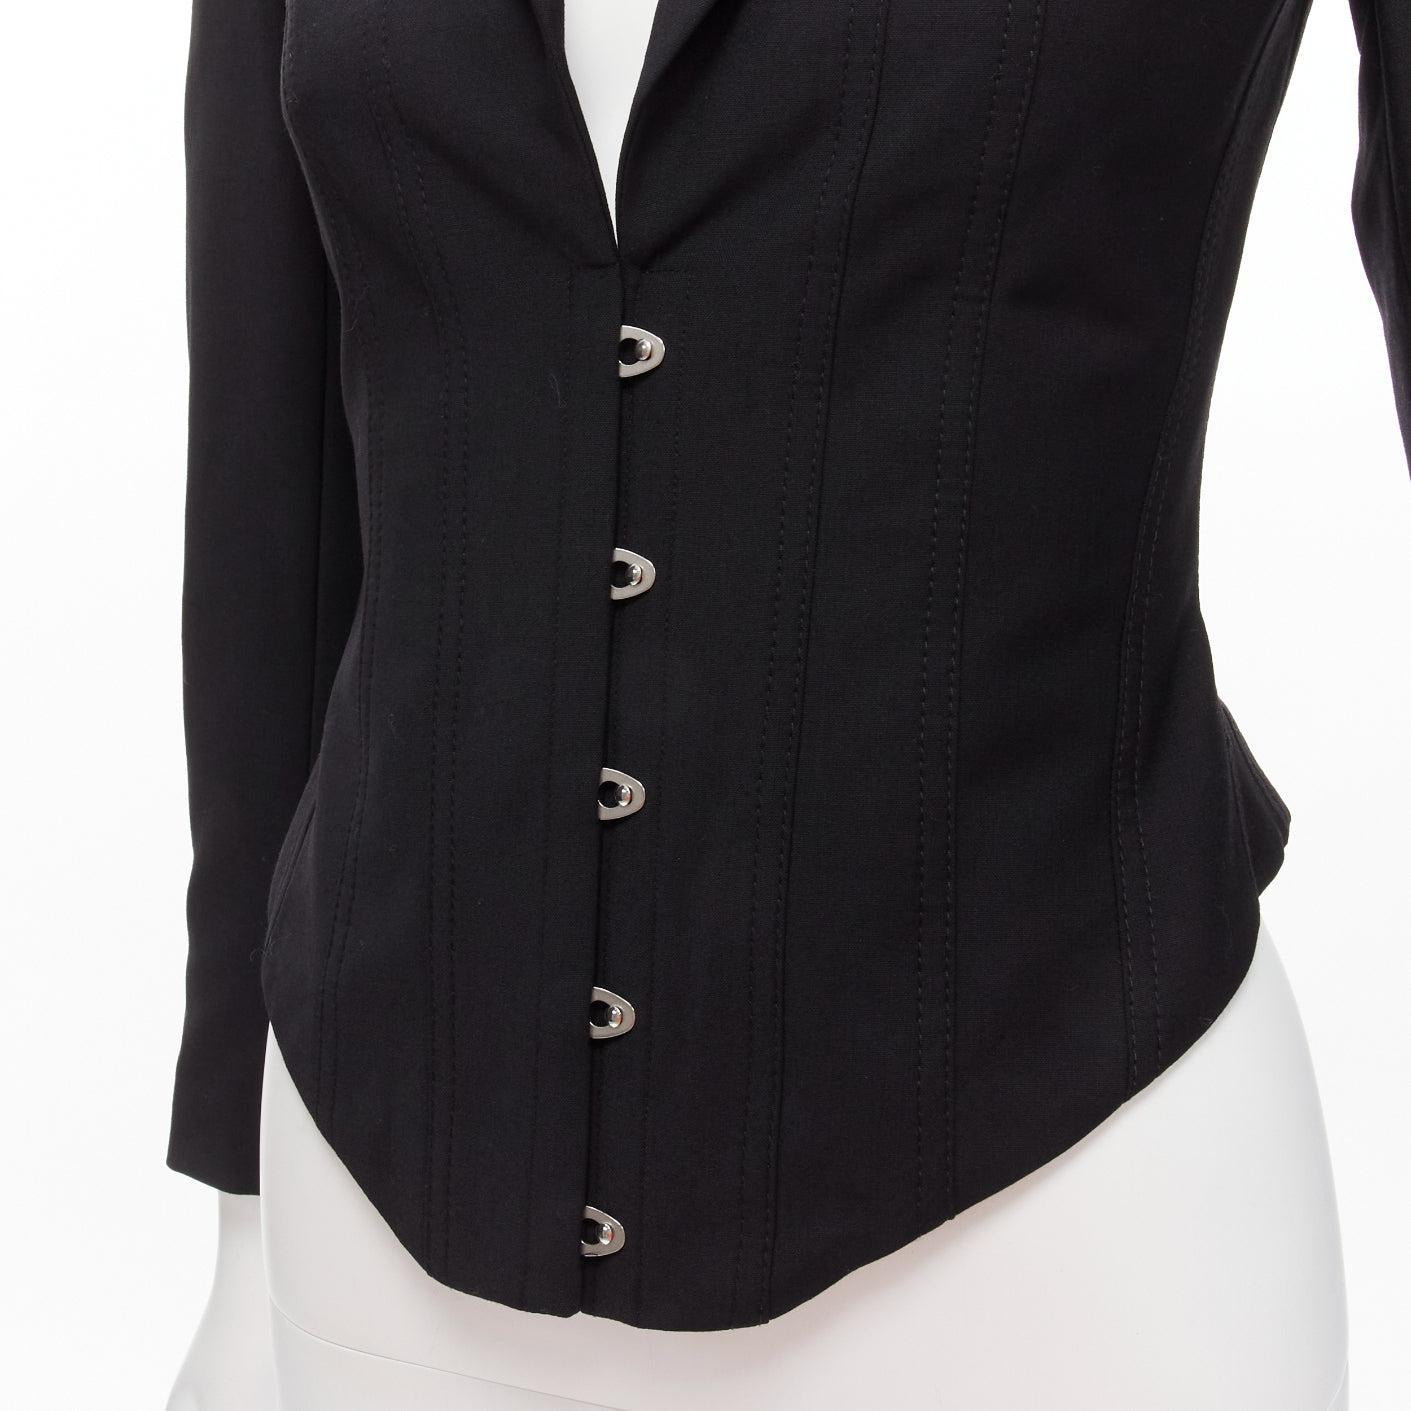 JEAN PAUL GAULTIER Vintage black wool hook eye laced corset blazer jacket IT38 XS
Reference: TGAS/D00608
Brand: Jean Paul Gaultier
Designer: Jean Paul Gaultier
Collection: FEMME
Material: Wool, Blend
Color: Black
Pattern: Solid
Closure: Hook &